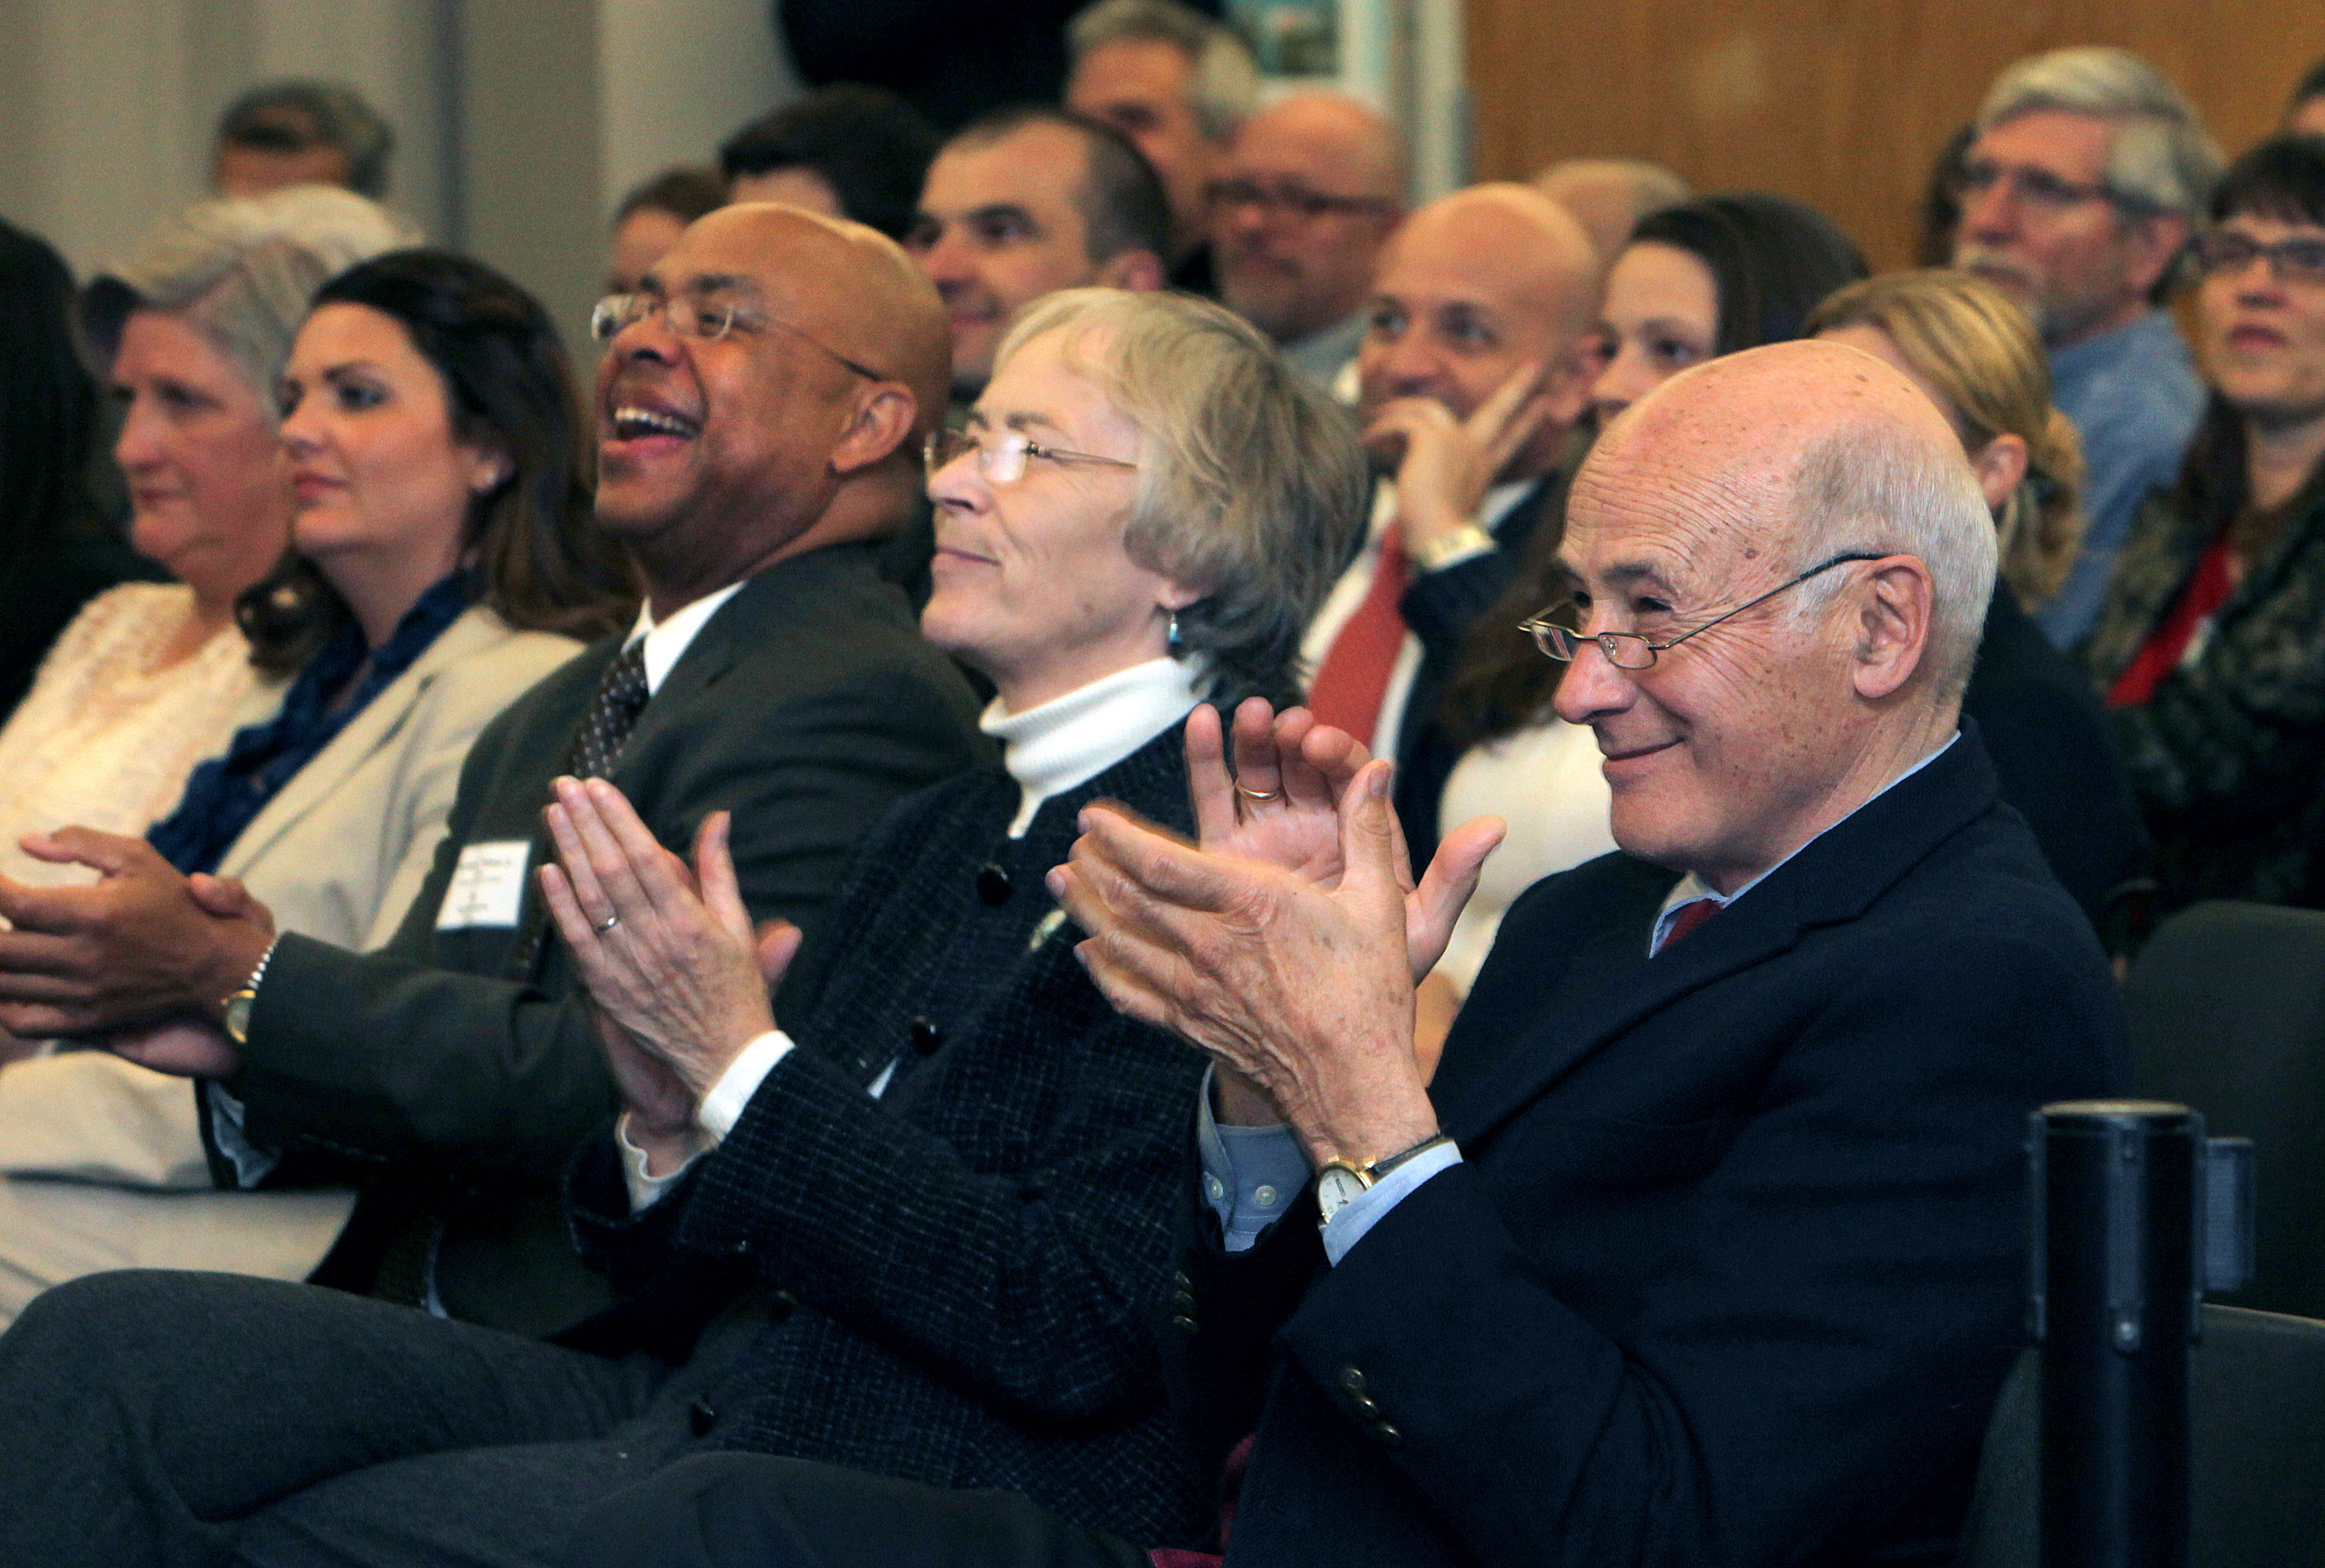 Audience photo from Joseph Nye lecture